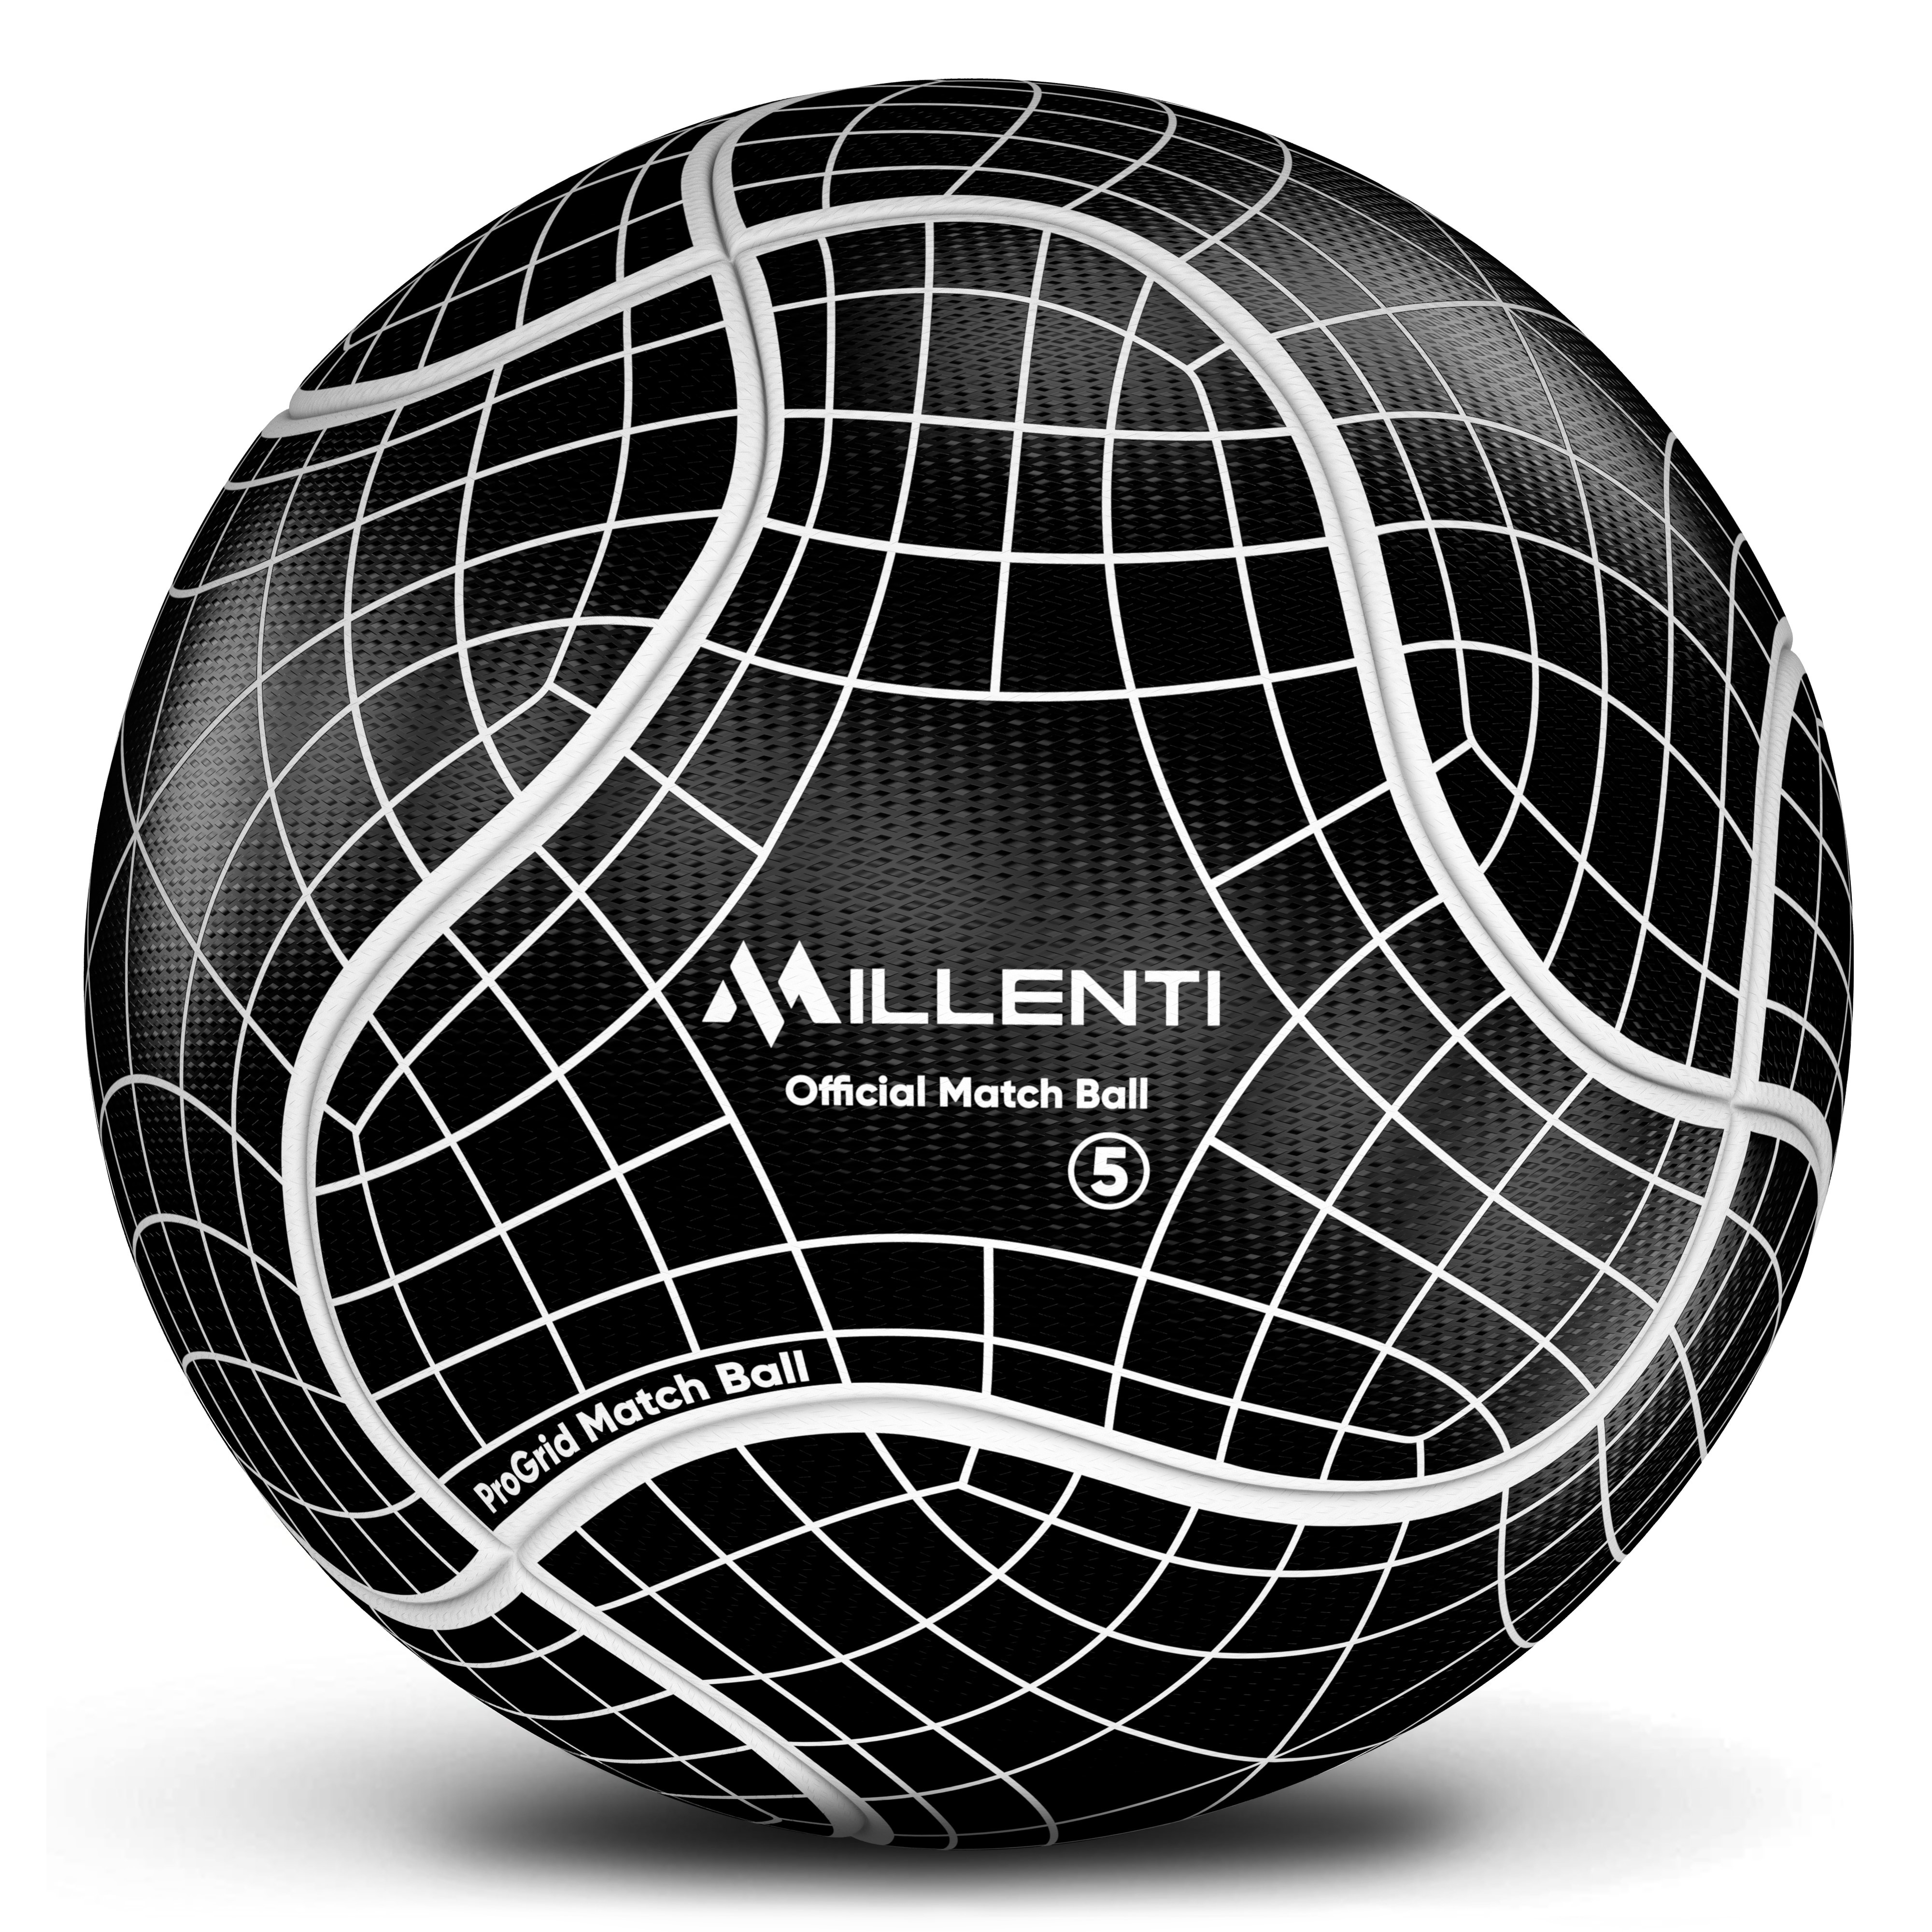 Millenti Soccer Balls Size 5 - ProGrid Official Match Soccer Ball With High-Visibility, Easy-To-Track Designs, Black White Soccer Ball, SB0905W